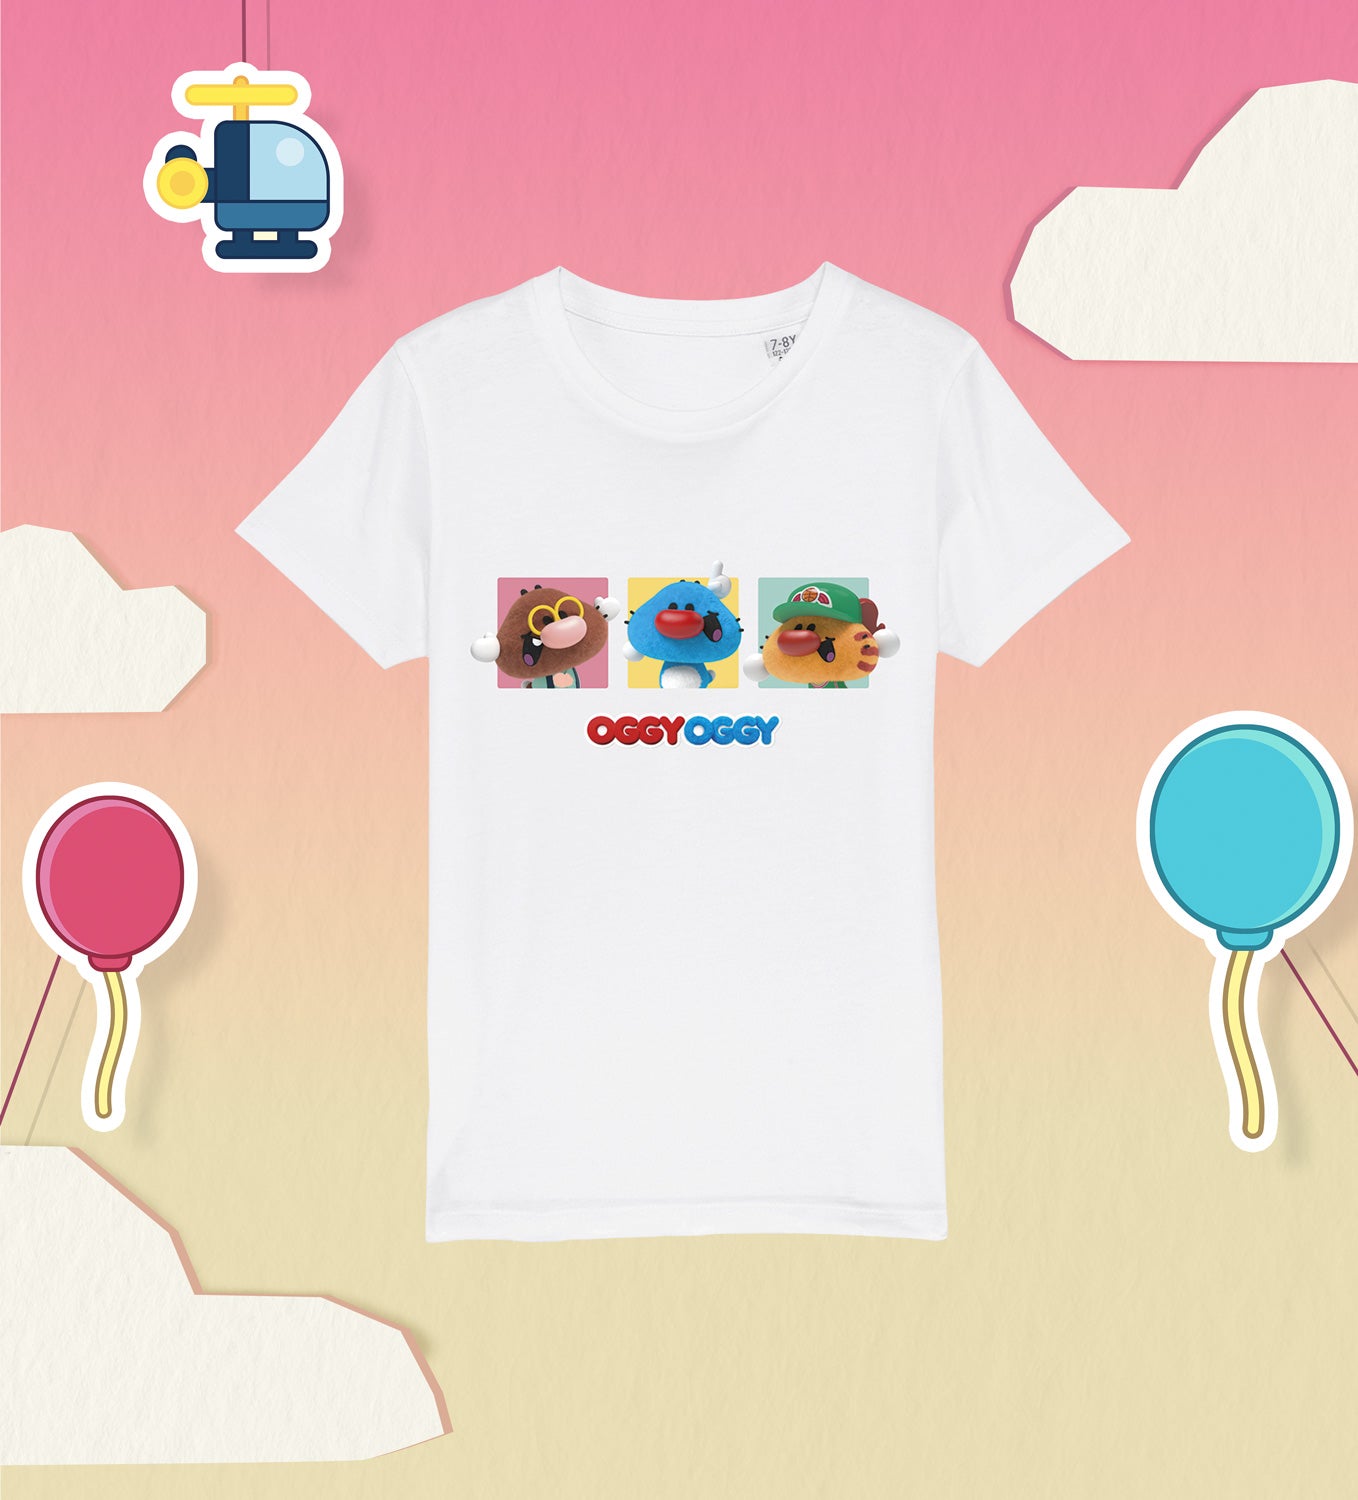 OGGY OGGY and friends Kids Cotton T-Shirt